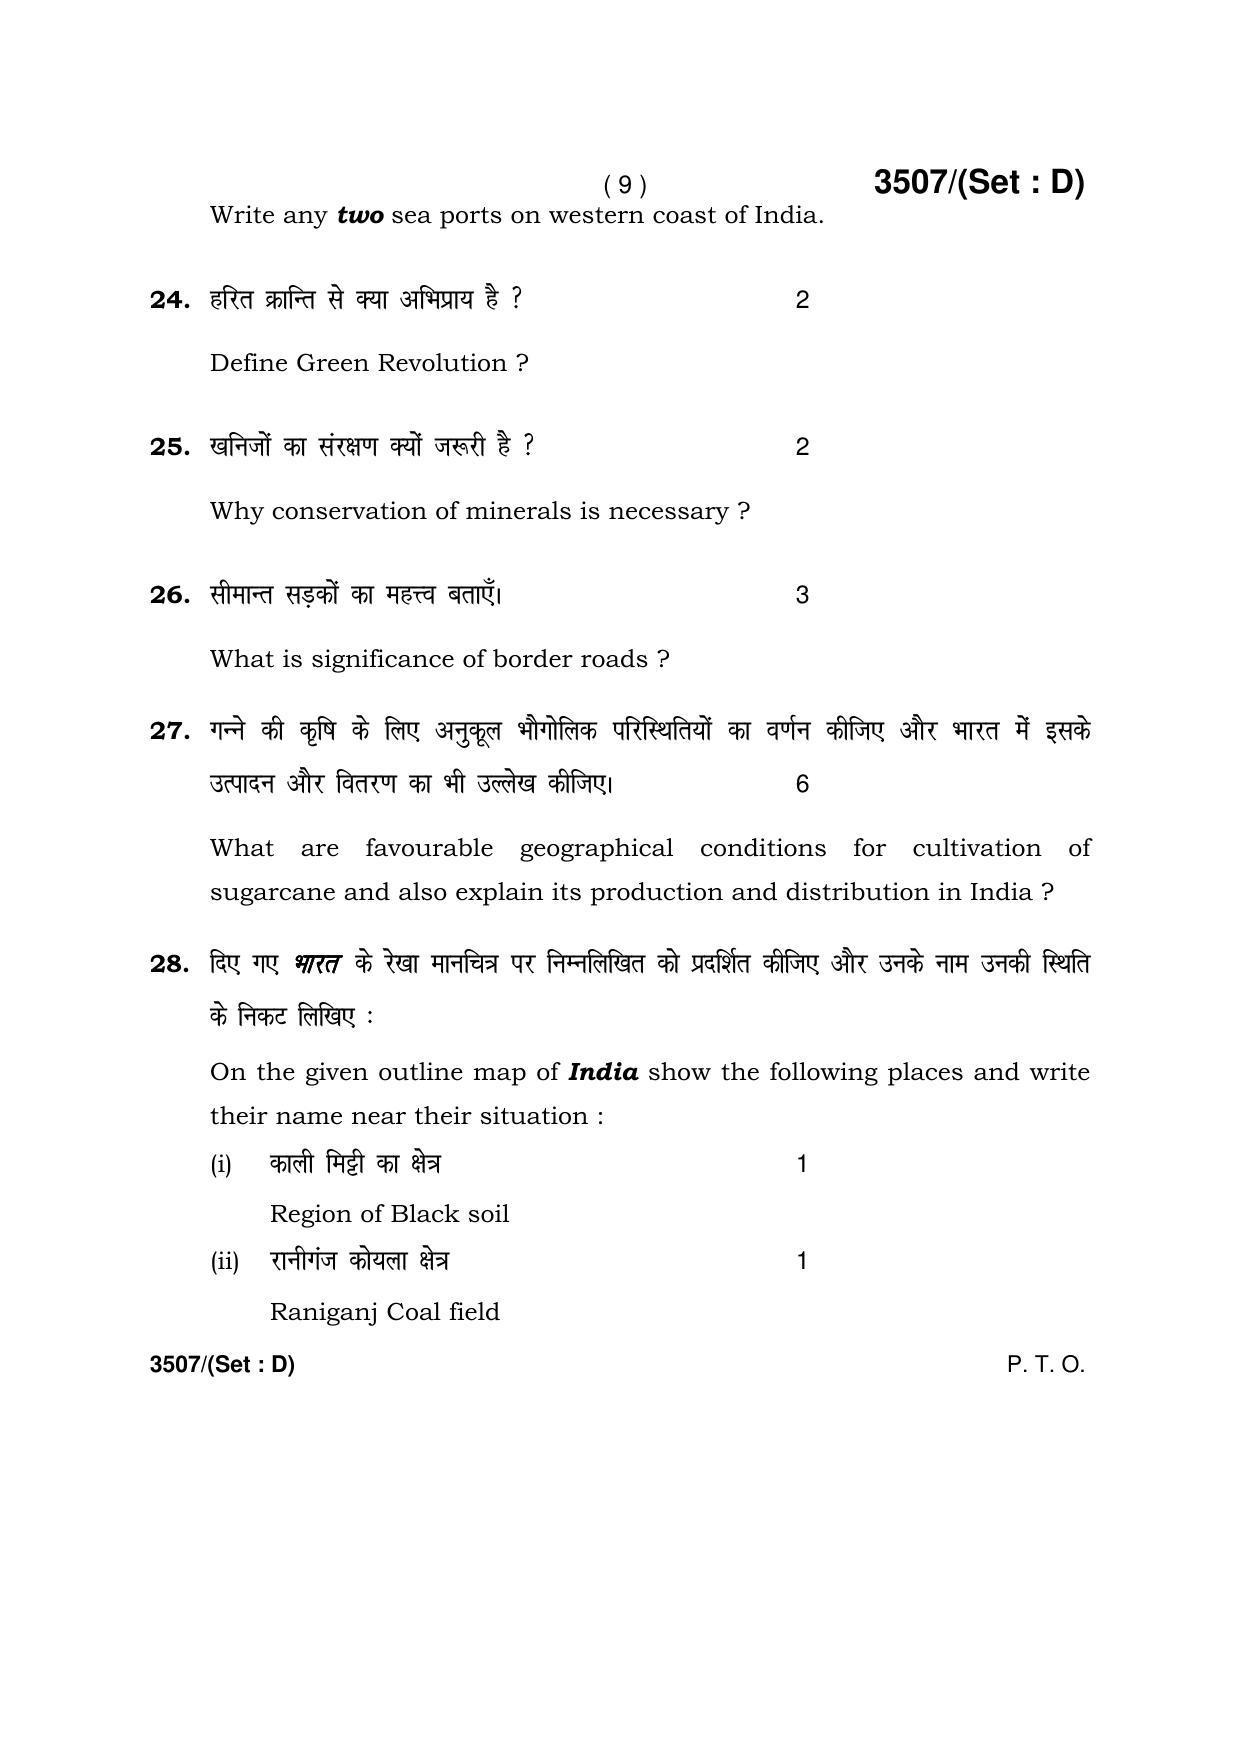 Haryana Board HBSE Class 10 Social Science -D 2018 Question Paper - Page 9